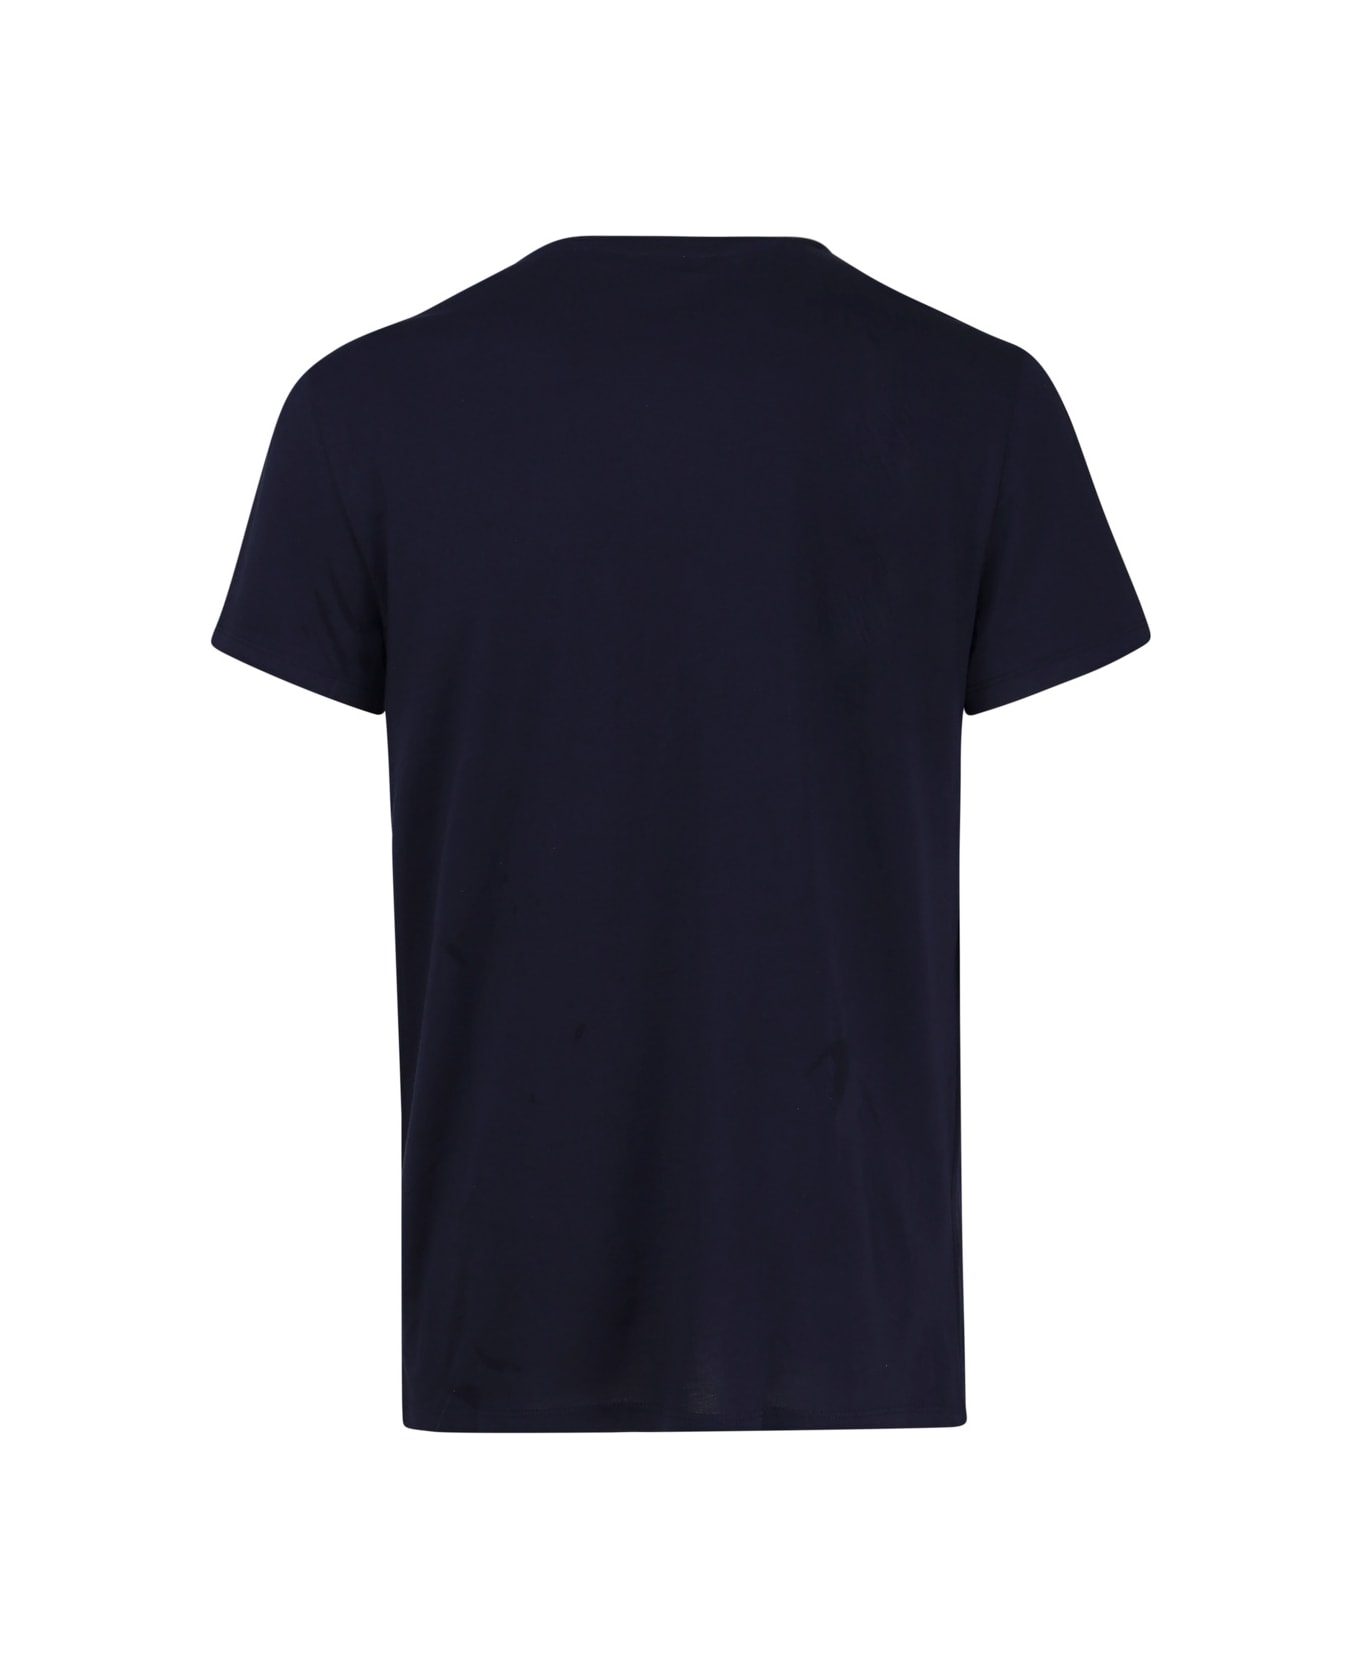 Lacoste Navy Blue T-shirt In Cotton Jersey Lacoste